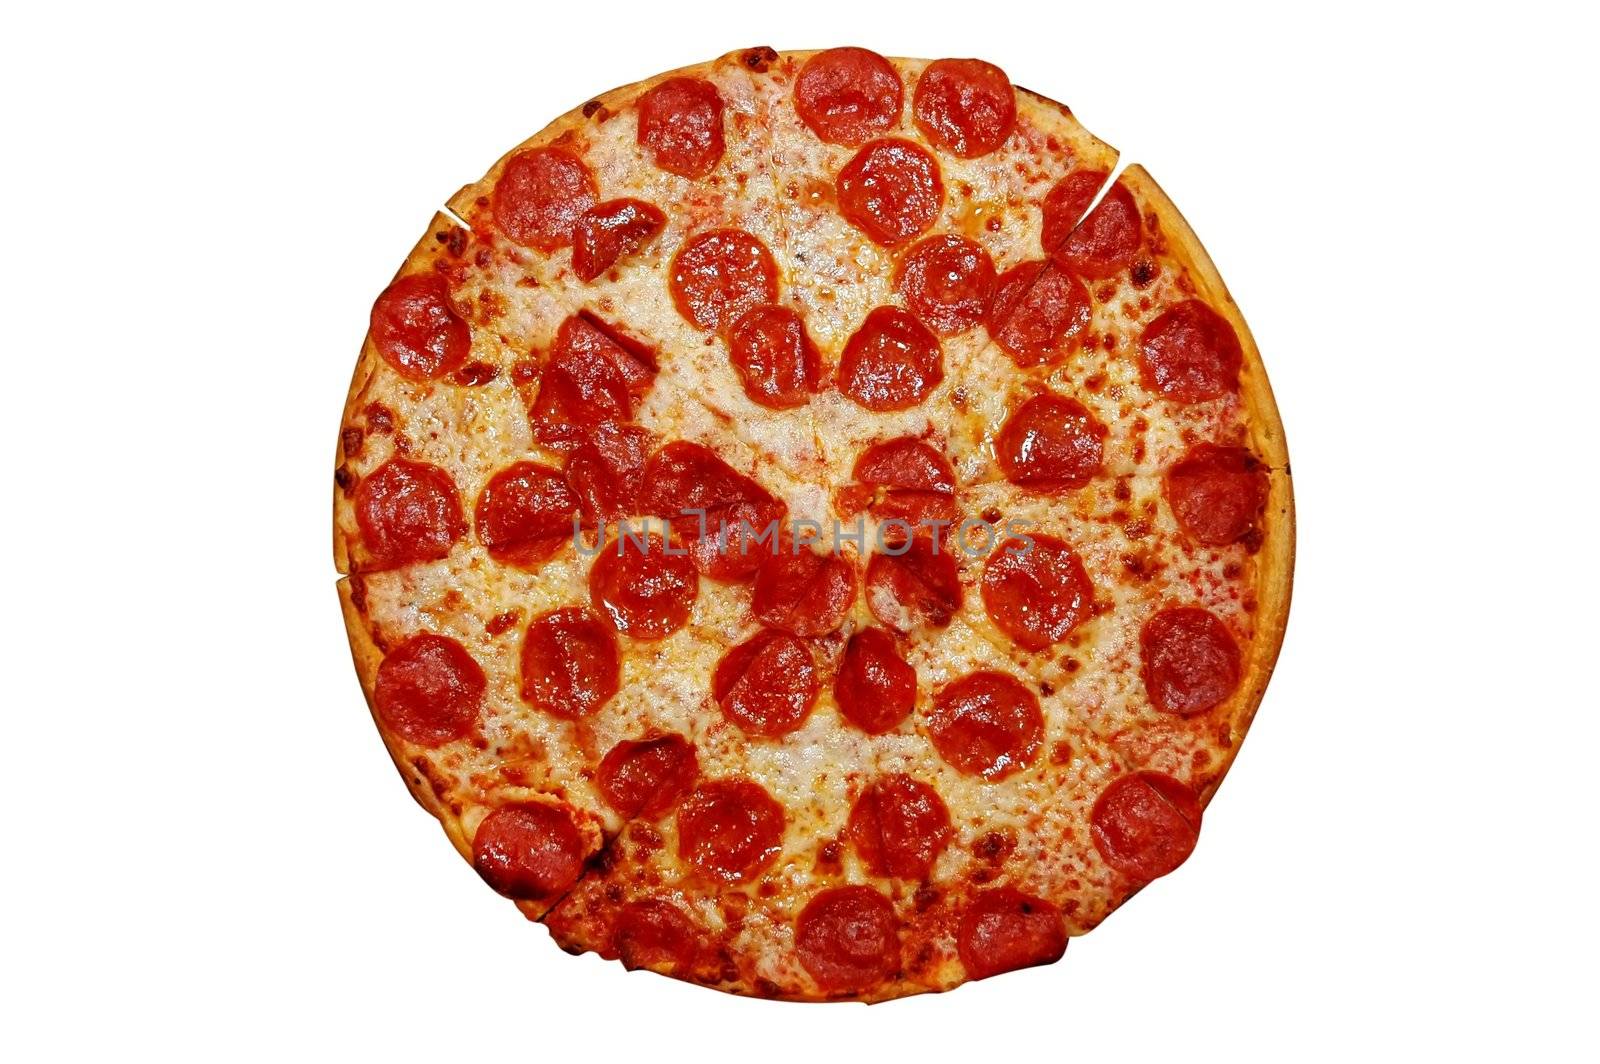 Pepperoni pizza with clipping path.